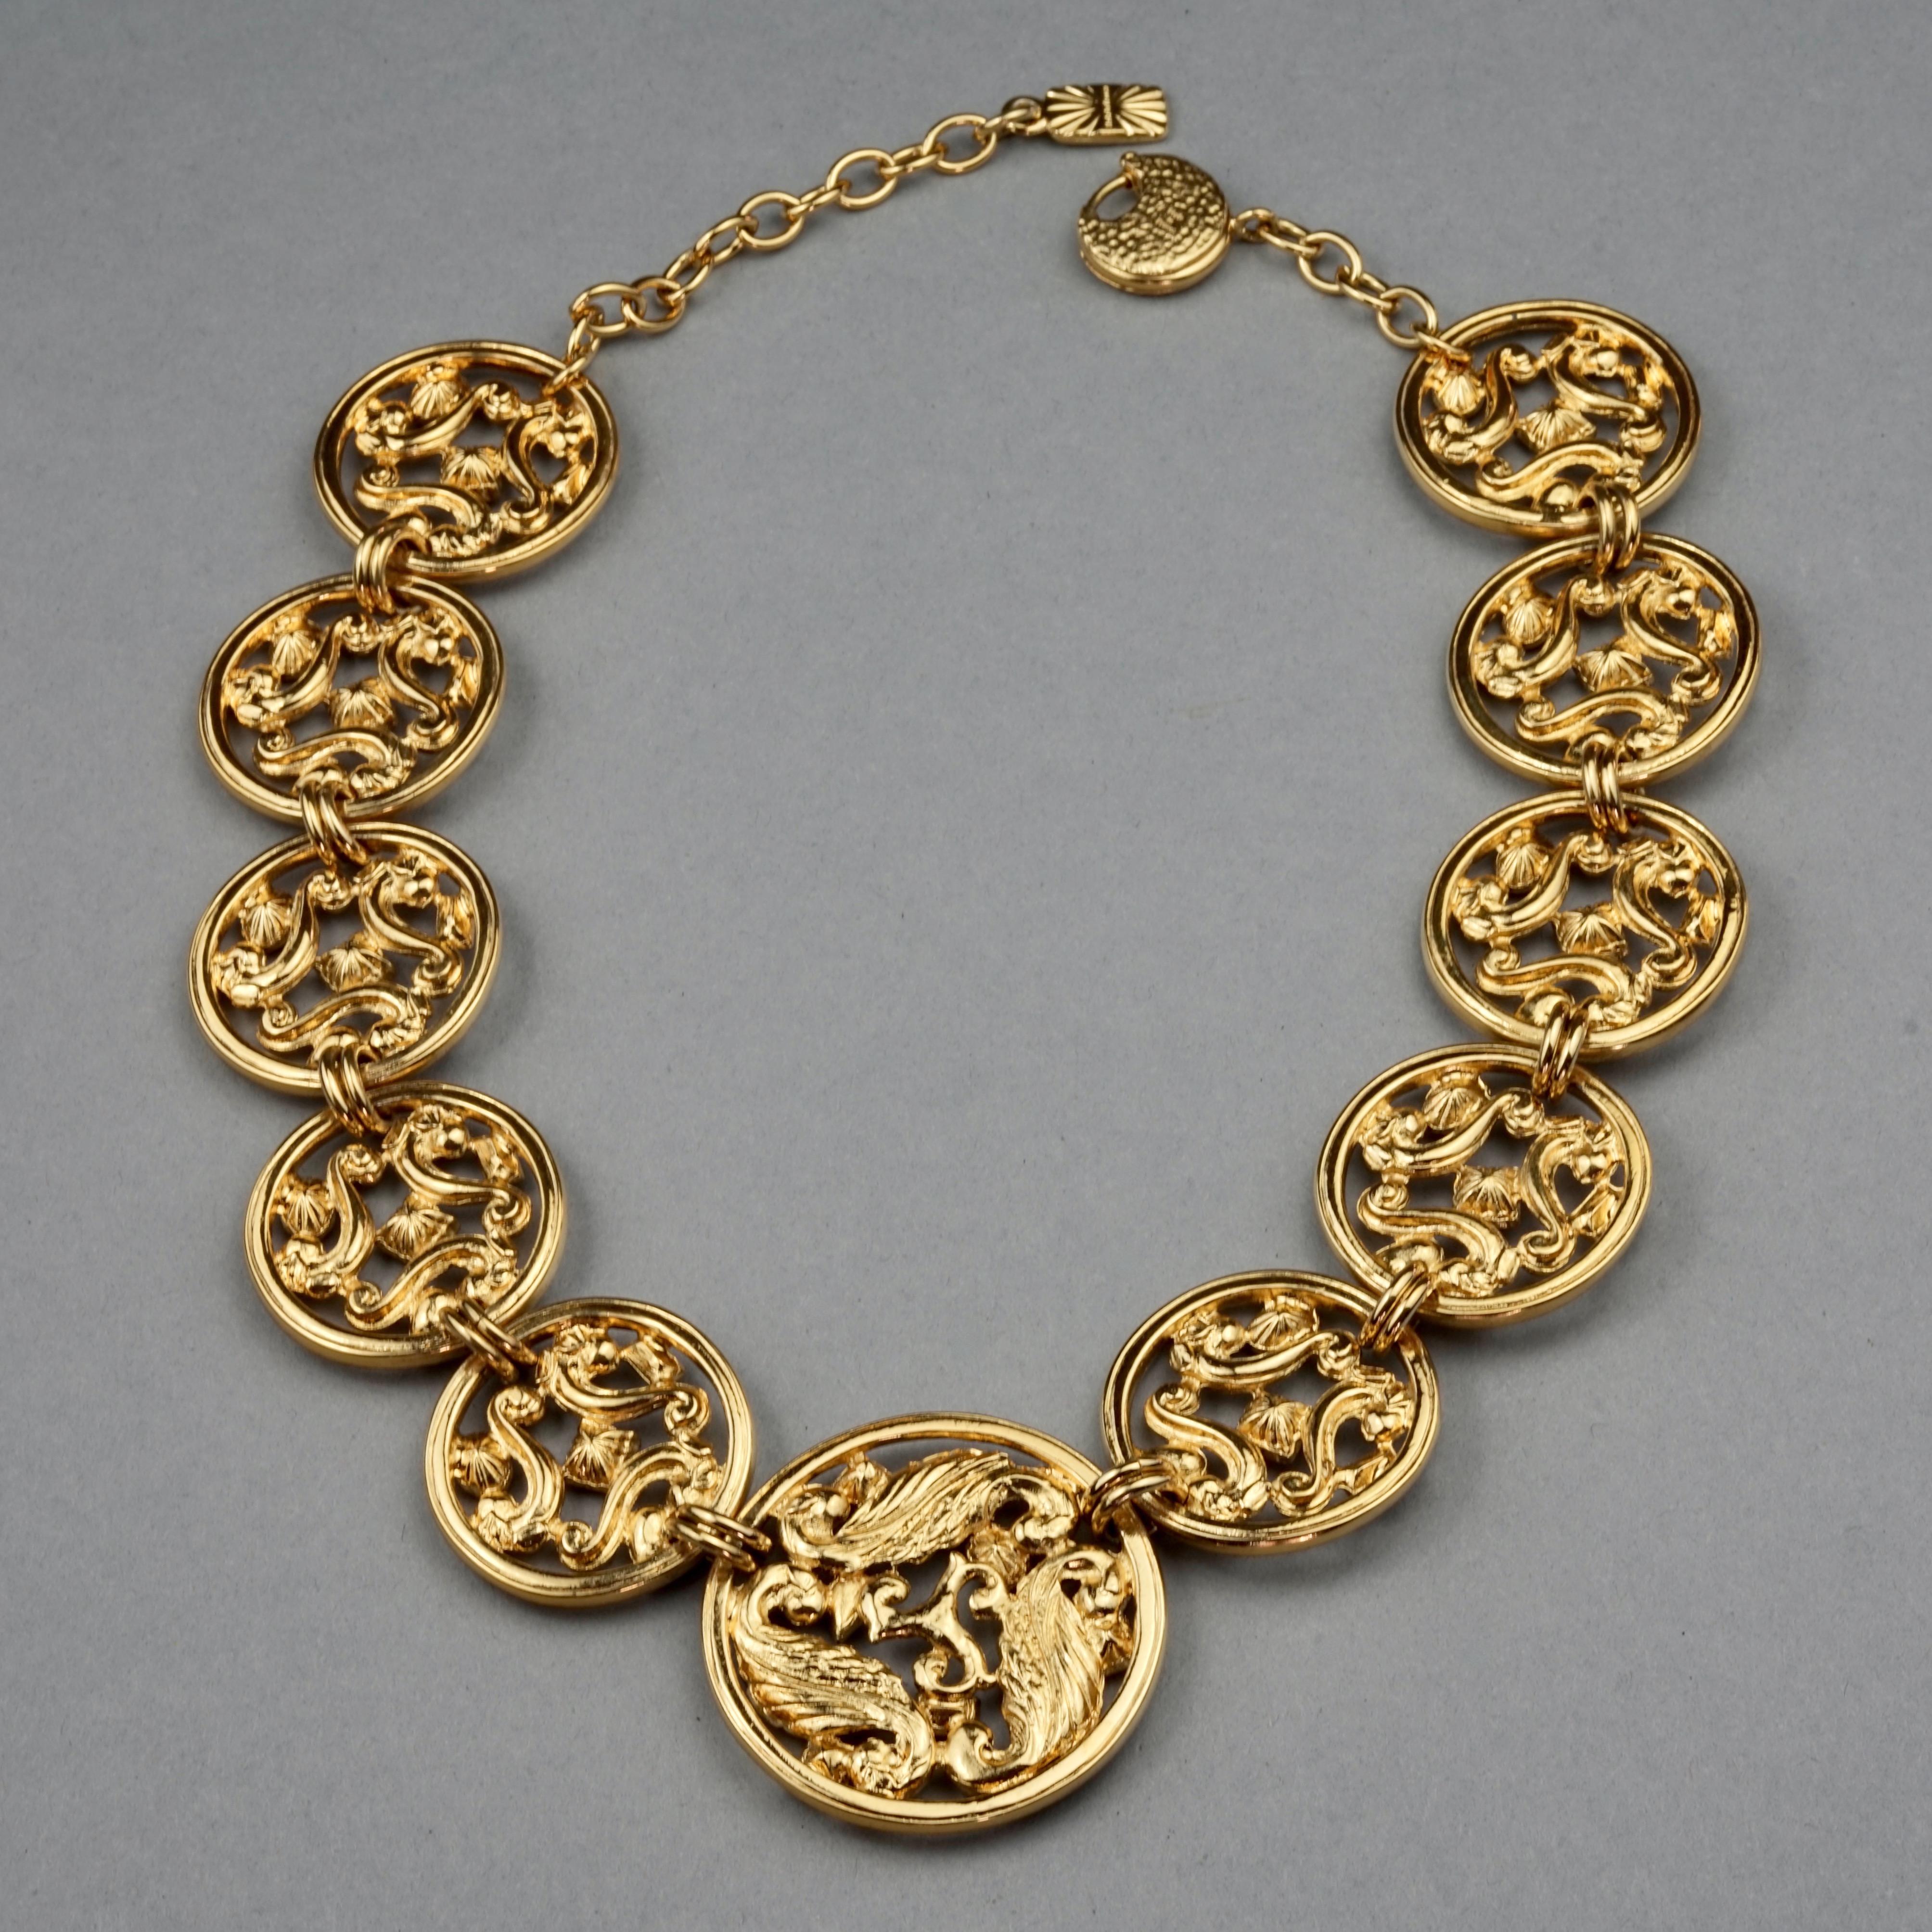 Vintage YVES SAINT LAURENT Ysl Jewelled Round Filigree Disc Necklace For Sale 3